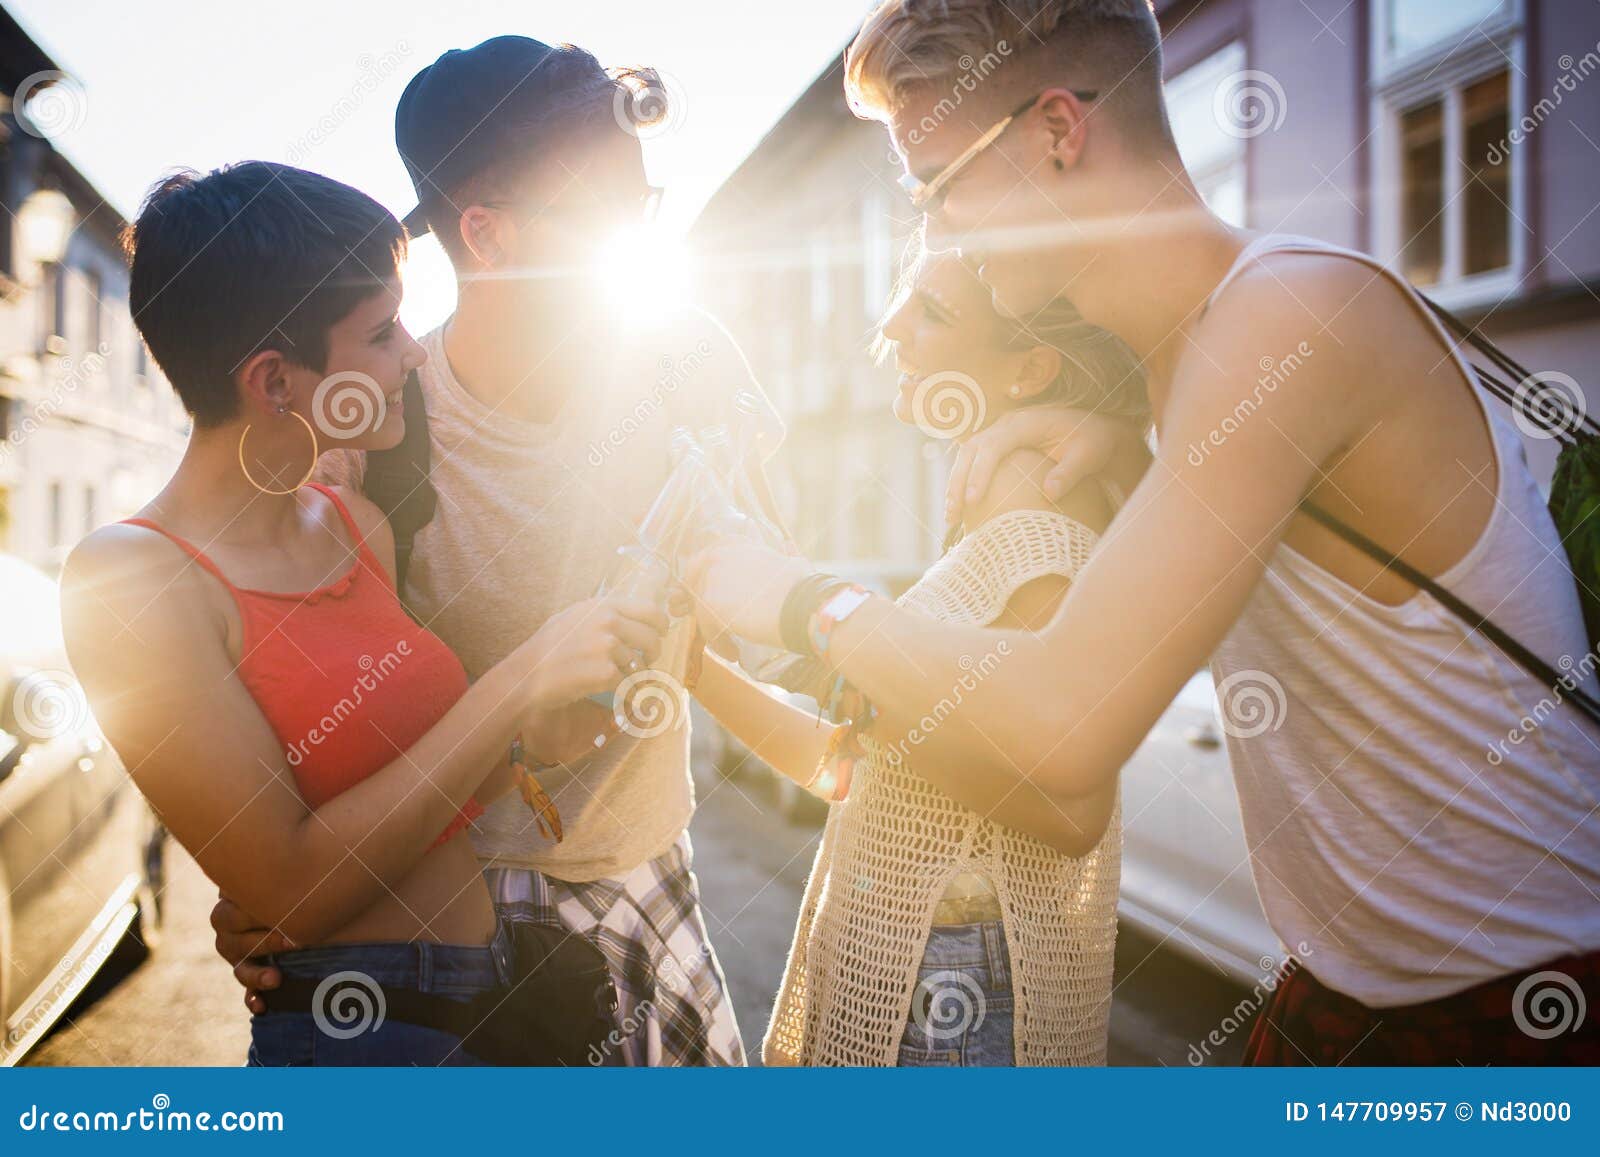 Group Of Young Friends Having Fun Together Stock Image Image Of